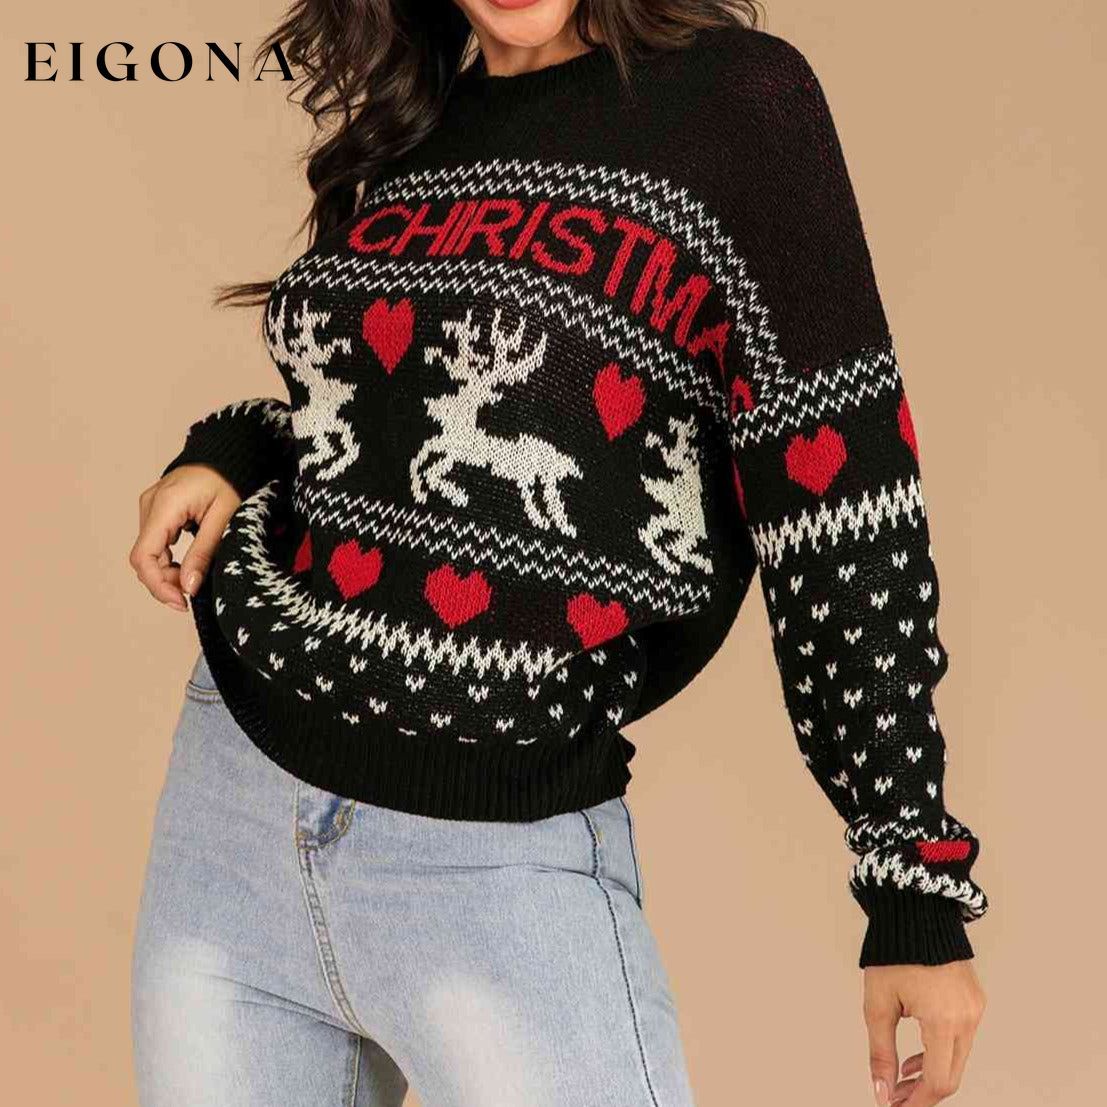 MERRY CHRISTMAS Round Neck Sweater christmas sweater clothes R@X Ship From Overseas Shipping Delay 09/29/2023 - 10/04/2023